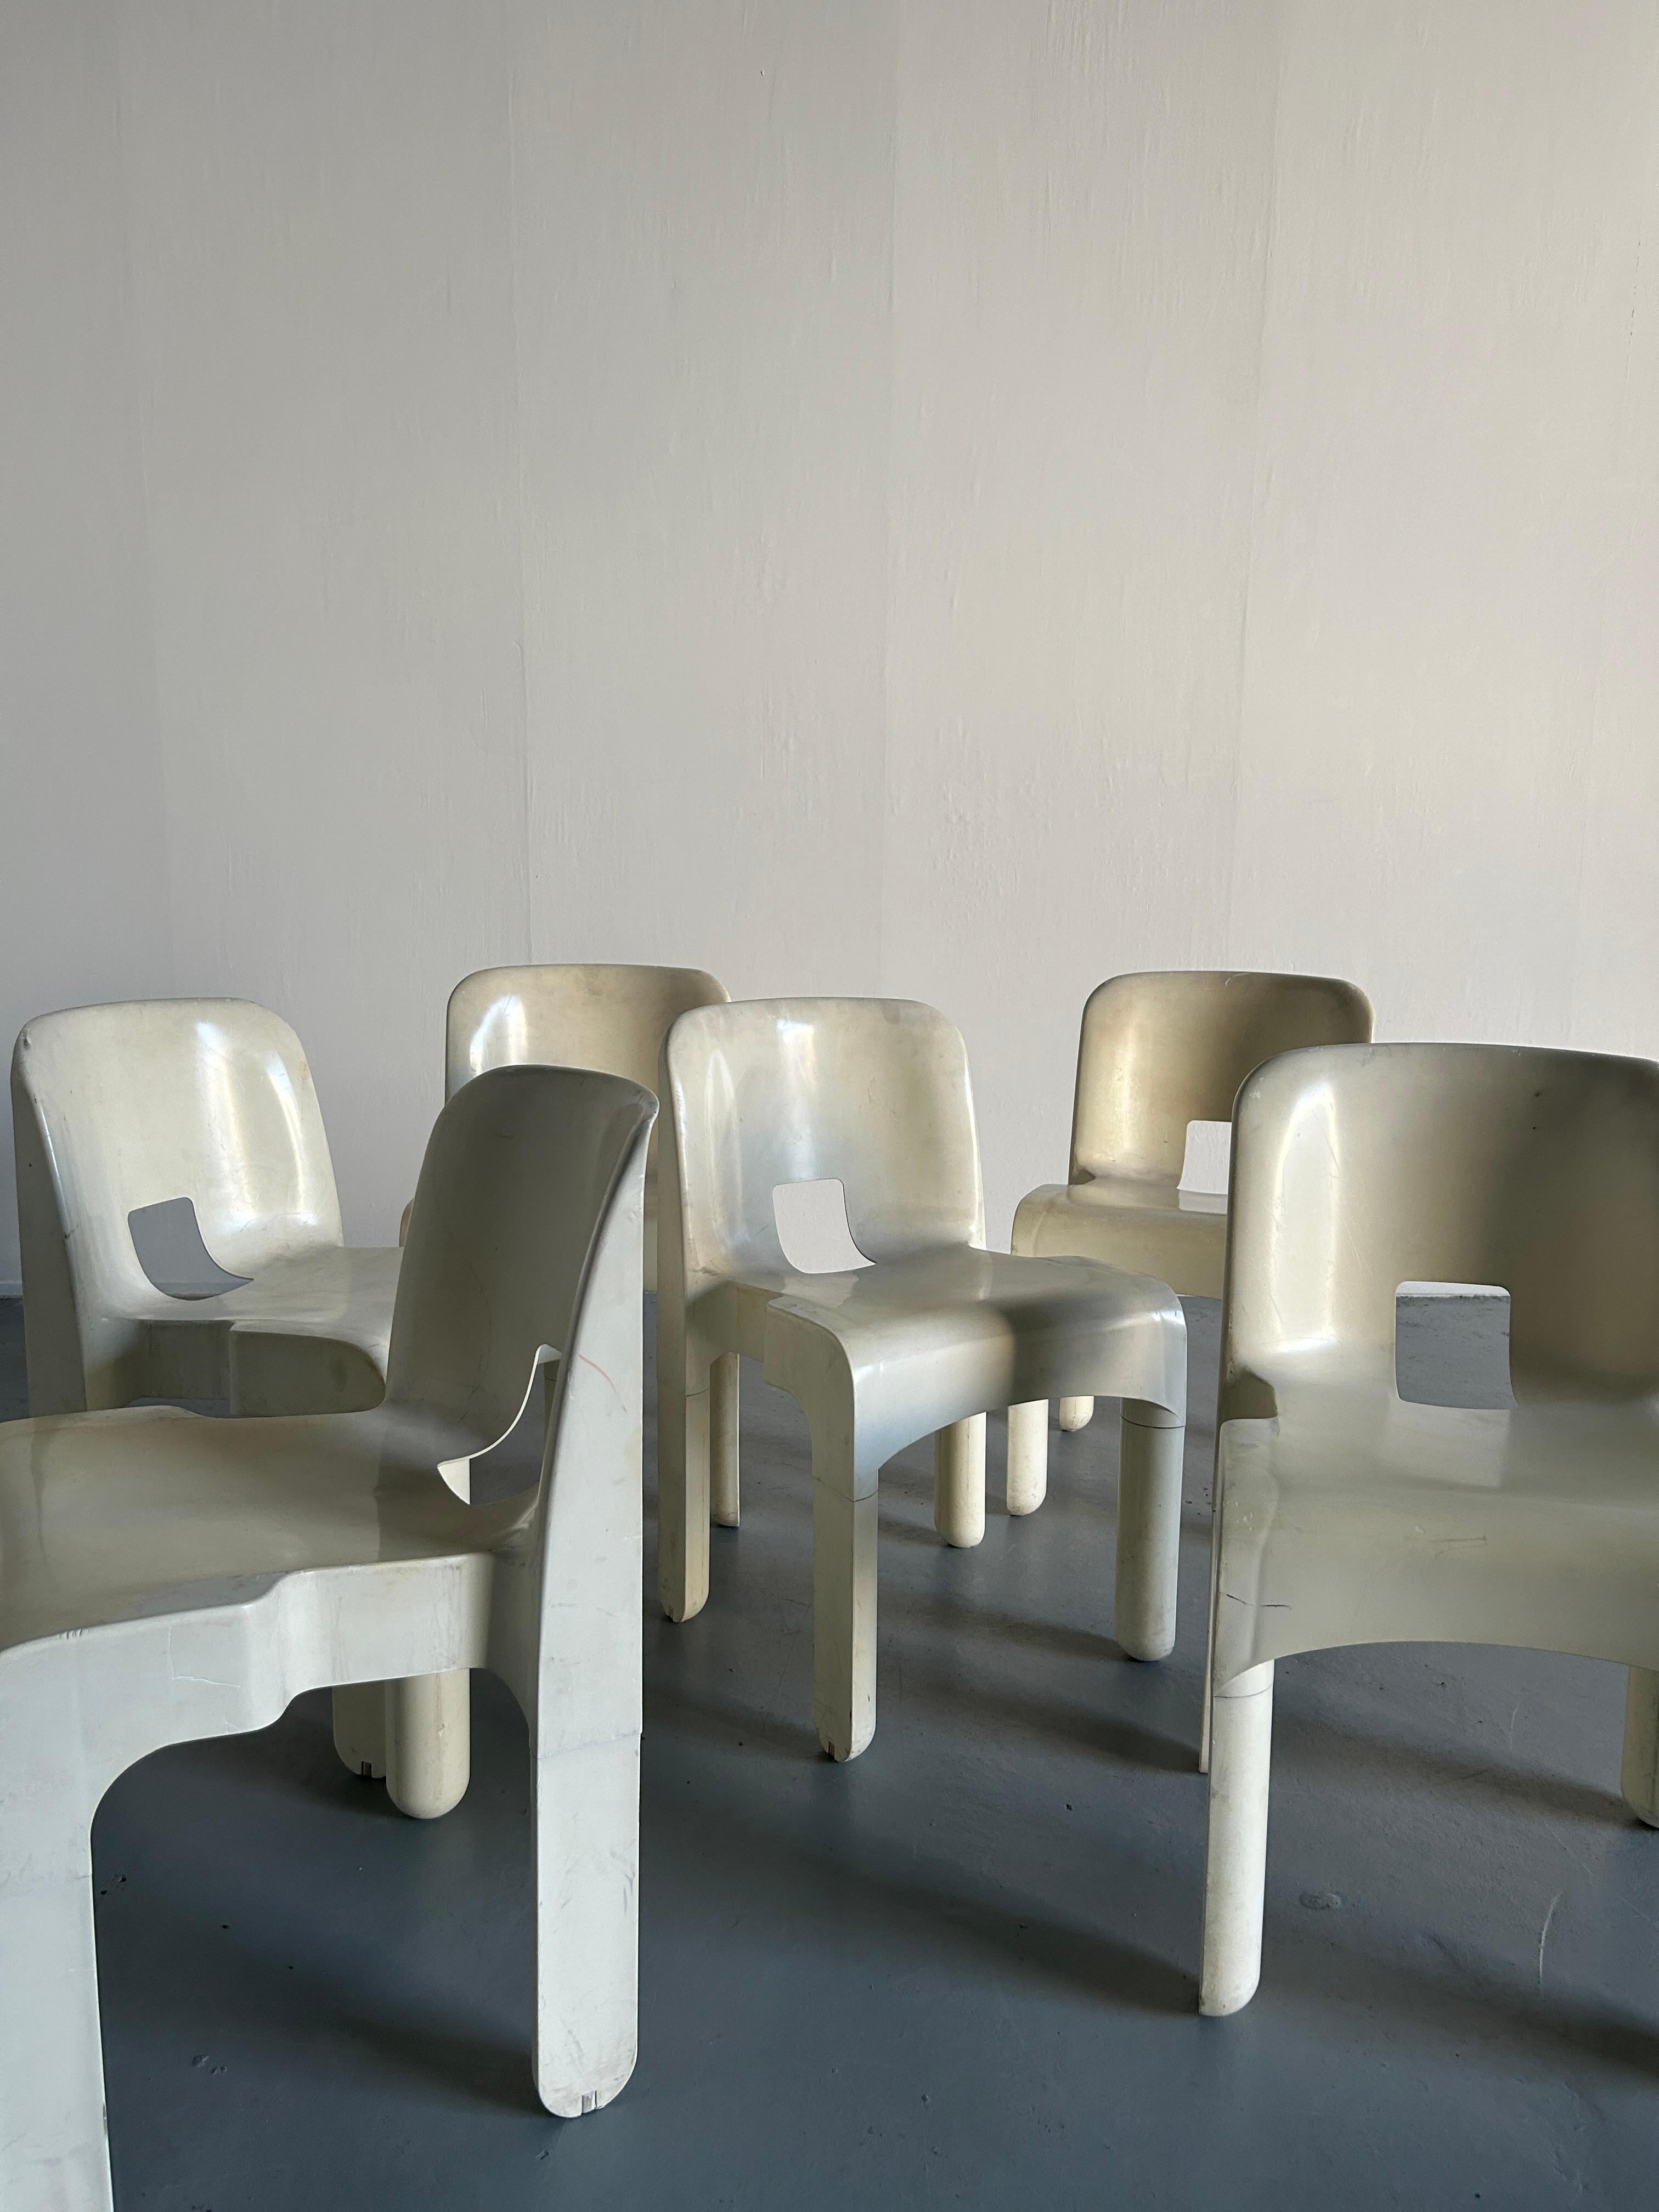 Late 20th Century 1 of 6 Joe Colombo Model '4867' or 'Universale' White Edition Chairs for Kartell